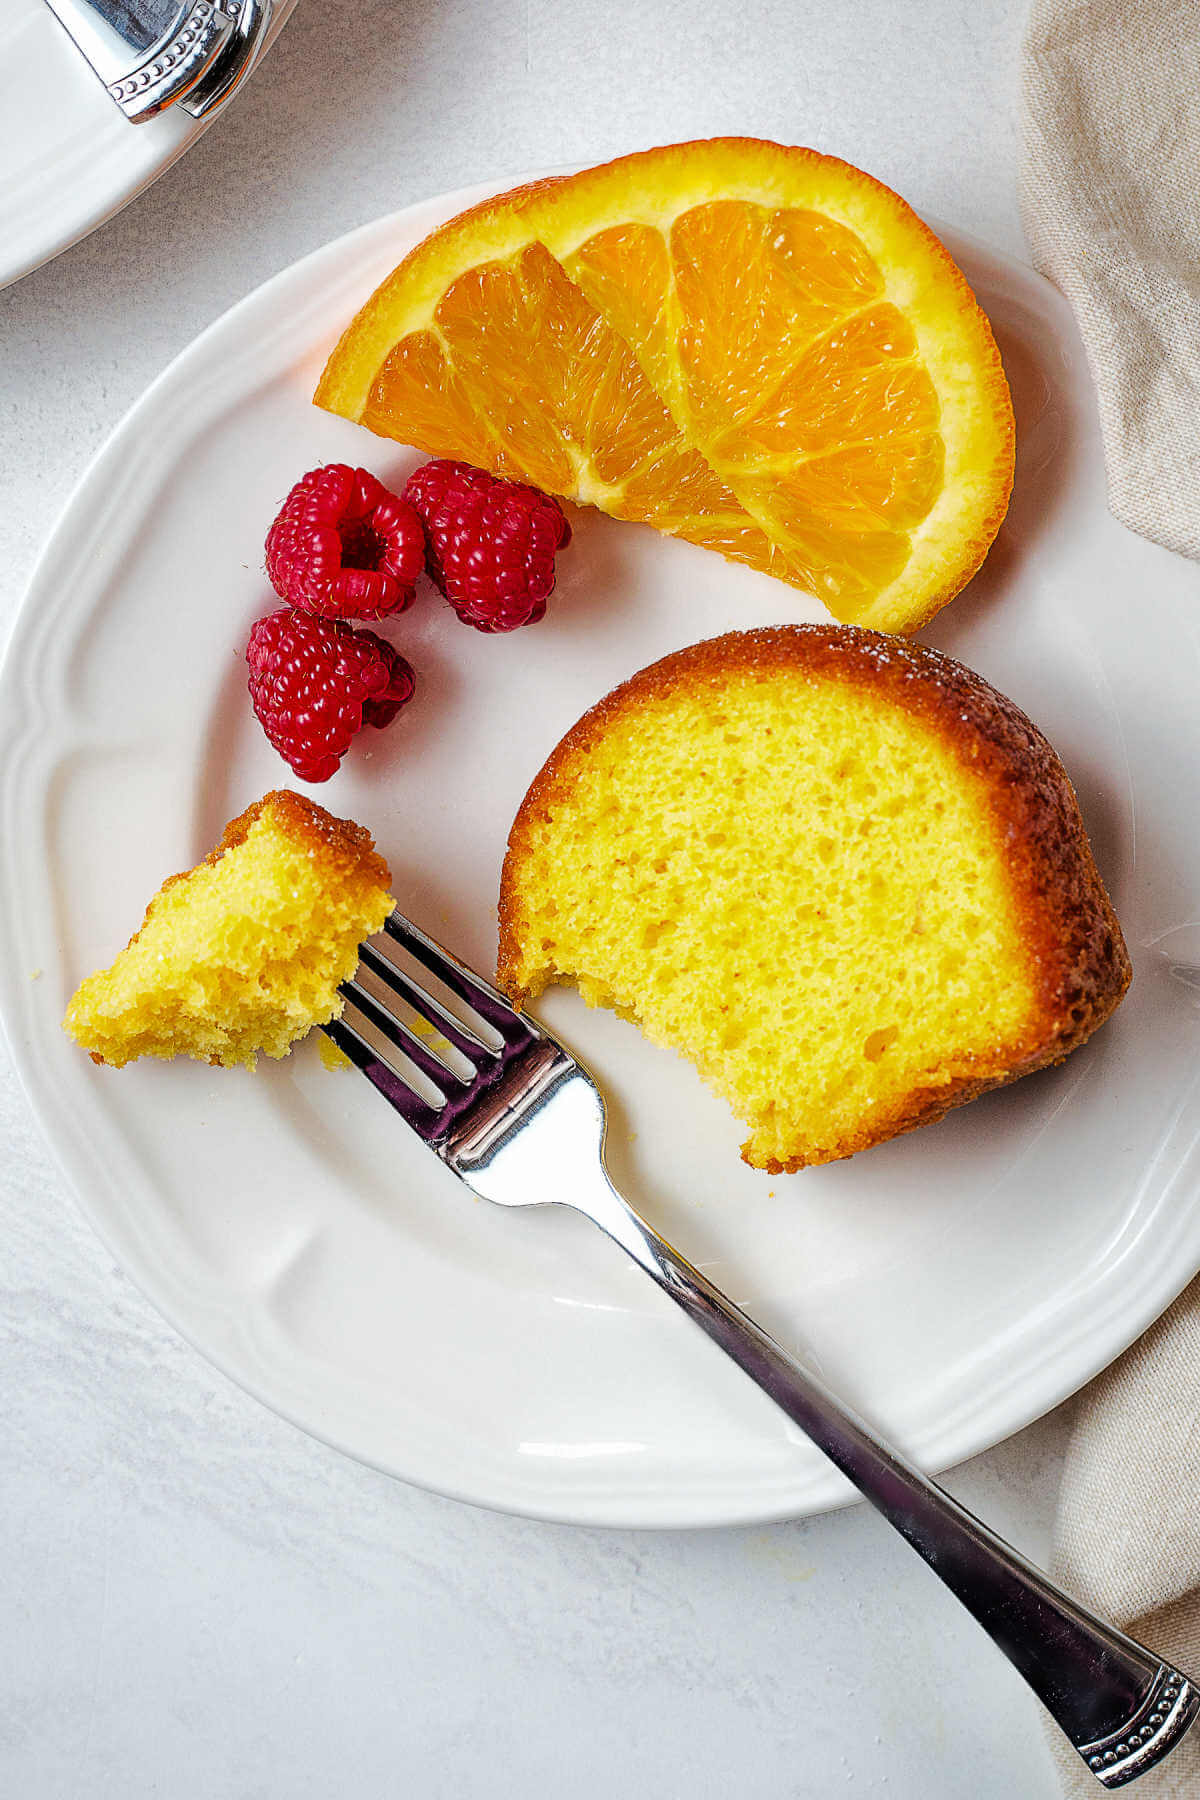 A slice of orange cake on a plate with a fork on a table.